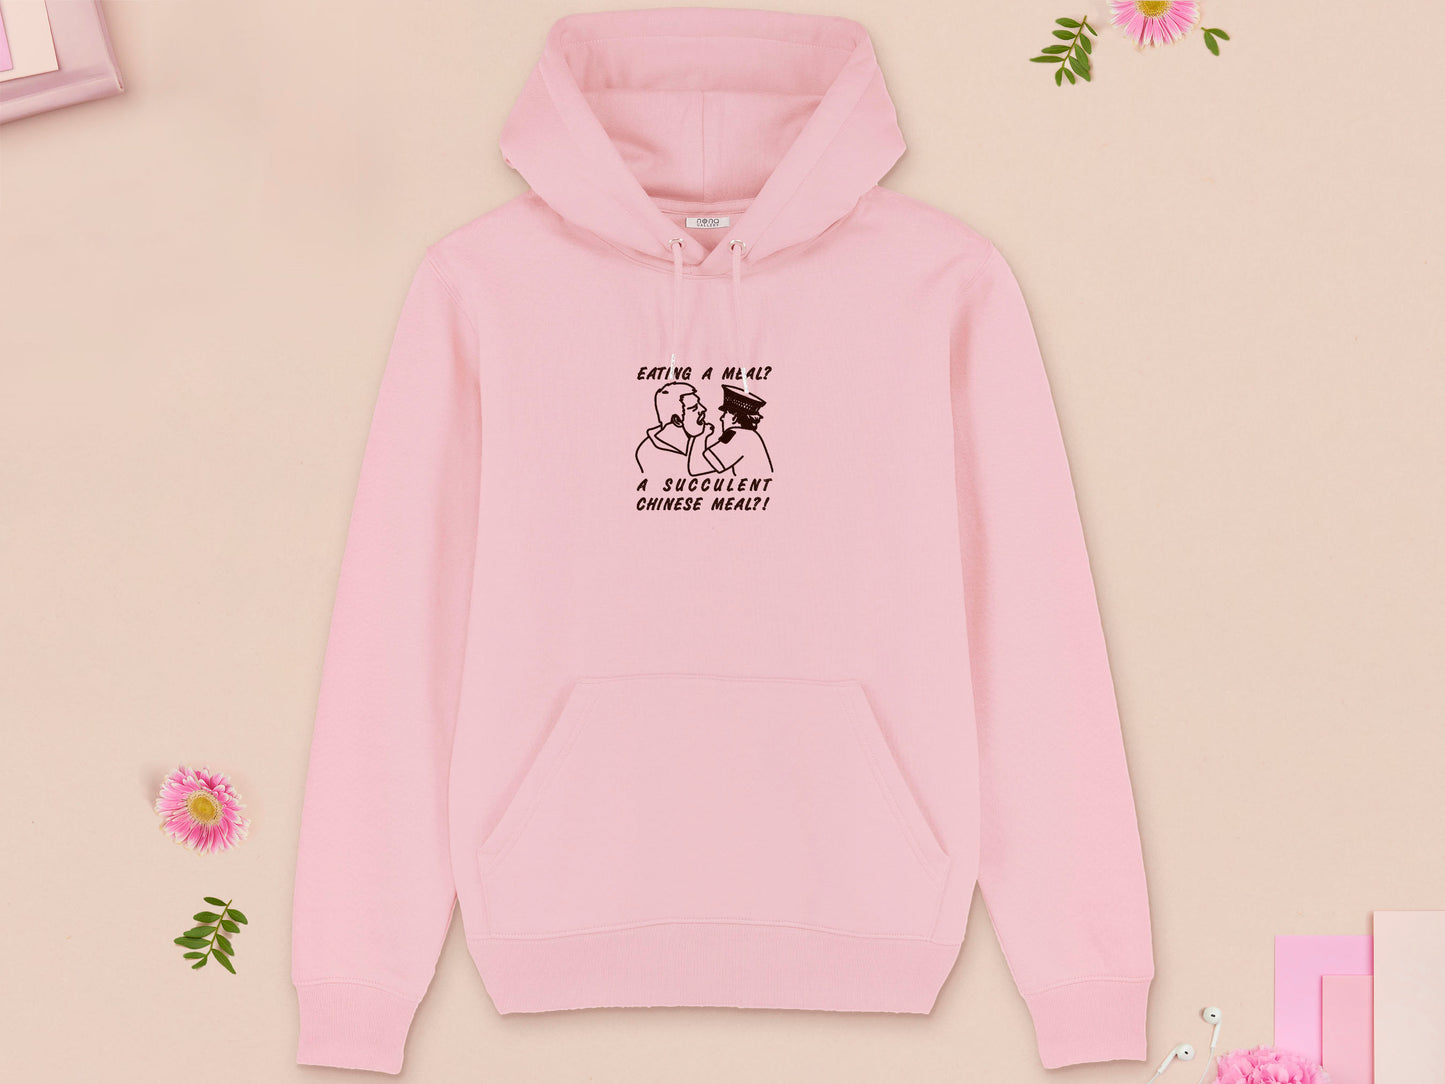 A pink long sleeve fleece hoodie, with an embroidered brown thread design of the viral democracy manifest video of Charles Dozsa being arrested by a policeman with the text reading Eating A Meal? A Succulent Chinese Meal?!